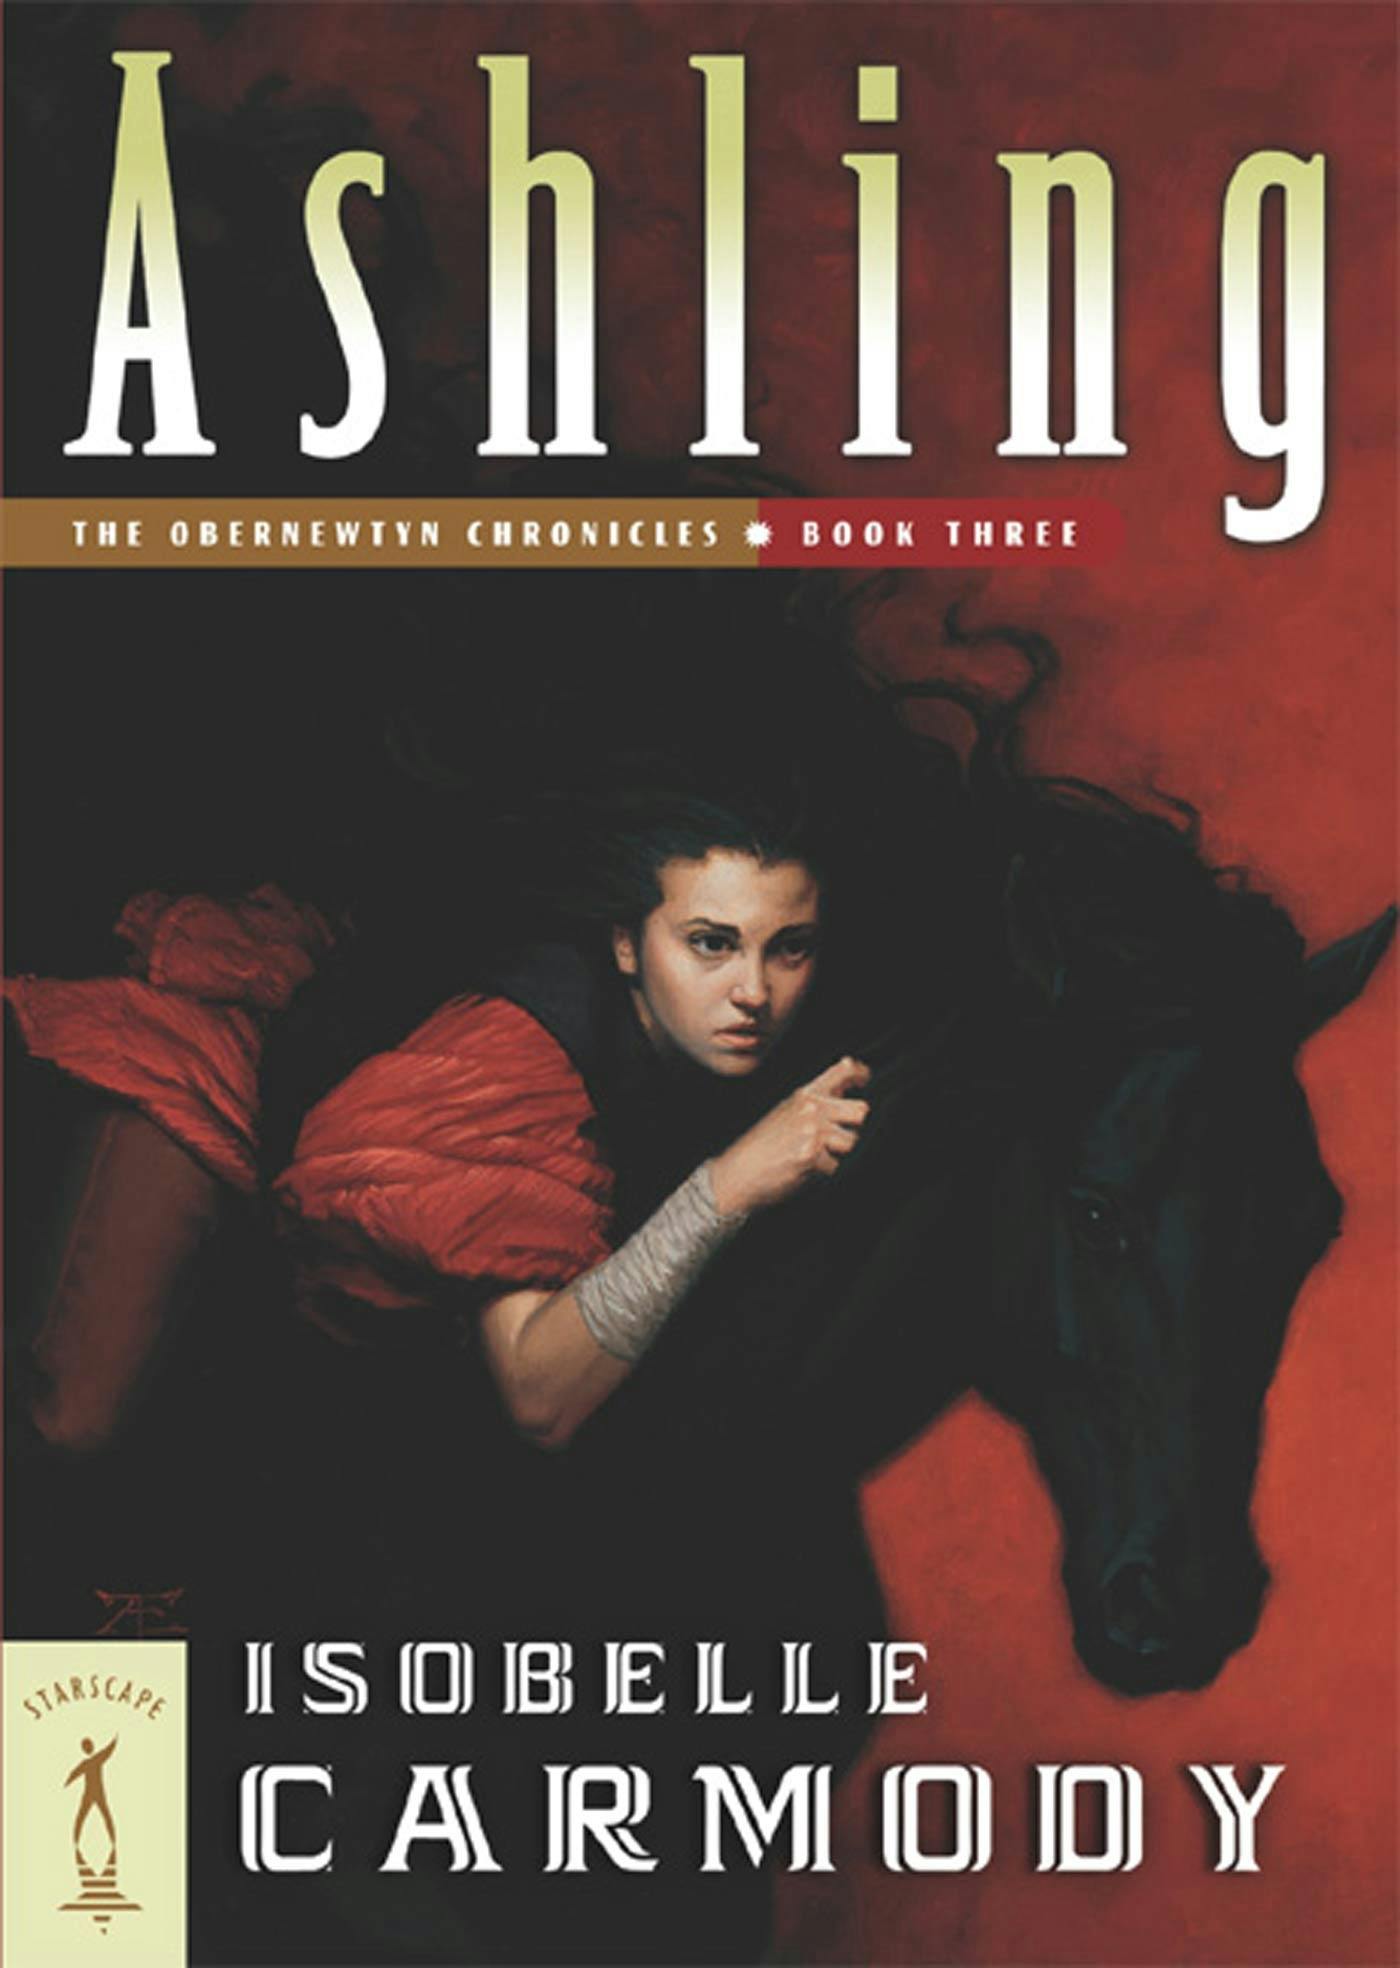 Cover for the book titled as: Ashling